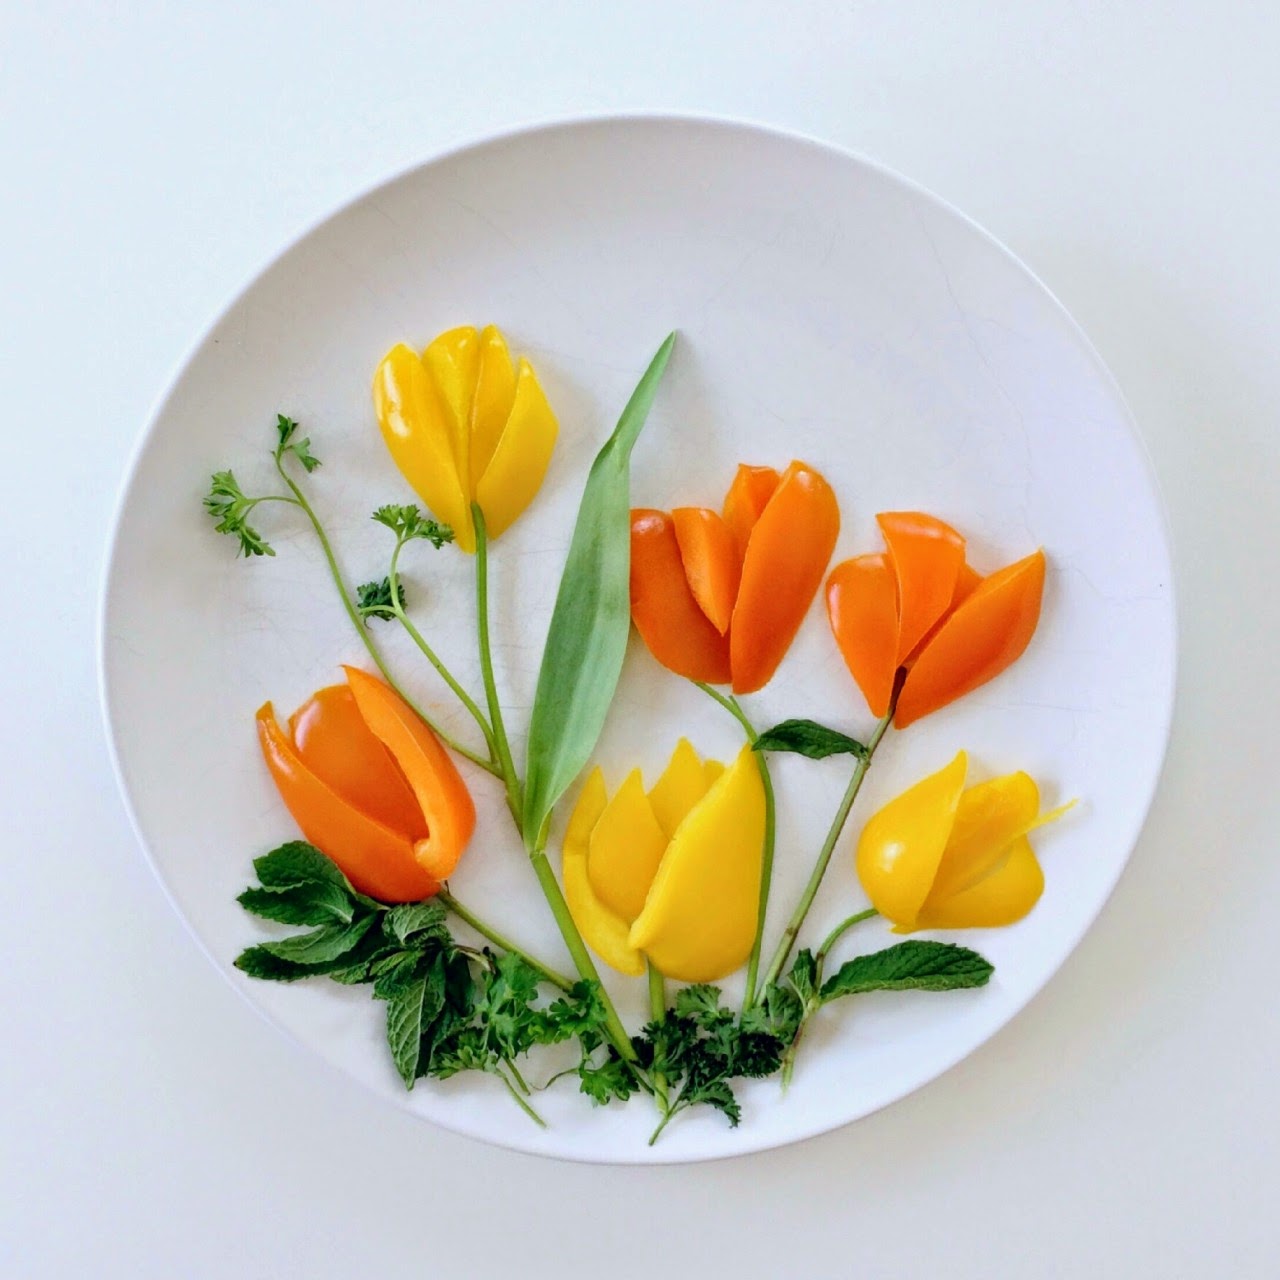 09-Tulips-Bell-Lauren-Purnell-Love-Art-and Love-for-Food-www-designstack-co